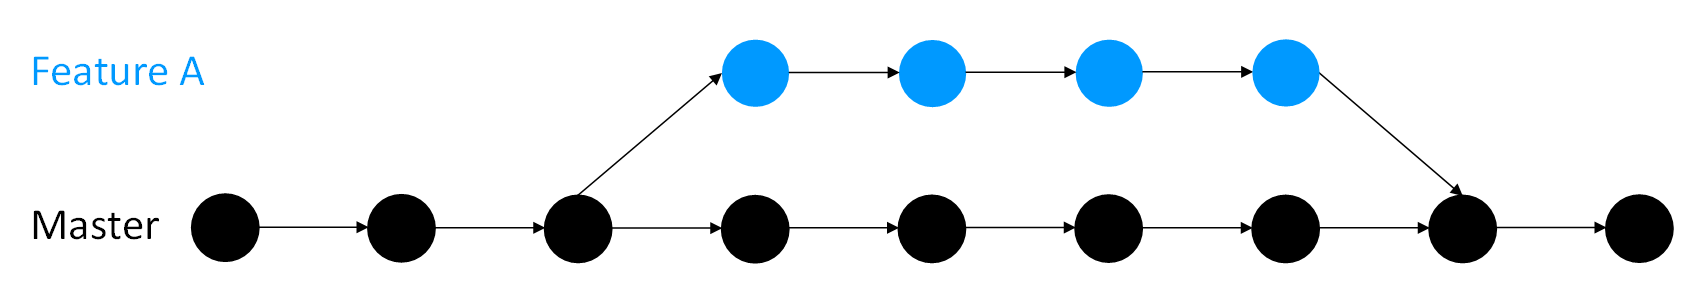 An illustration of a development and master branch in git